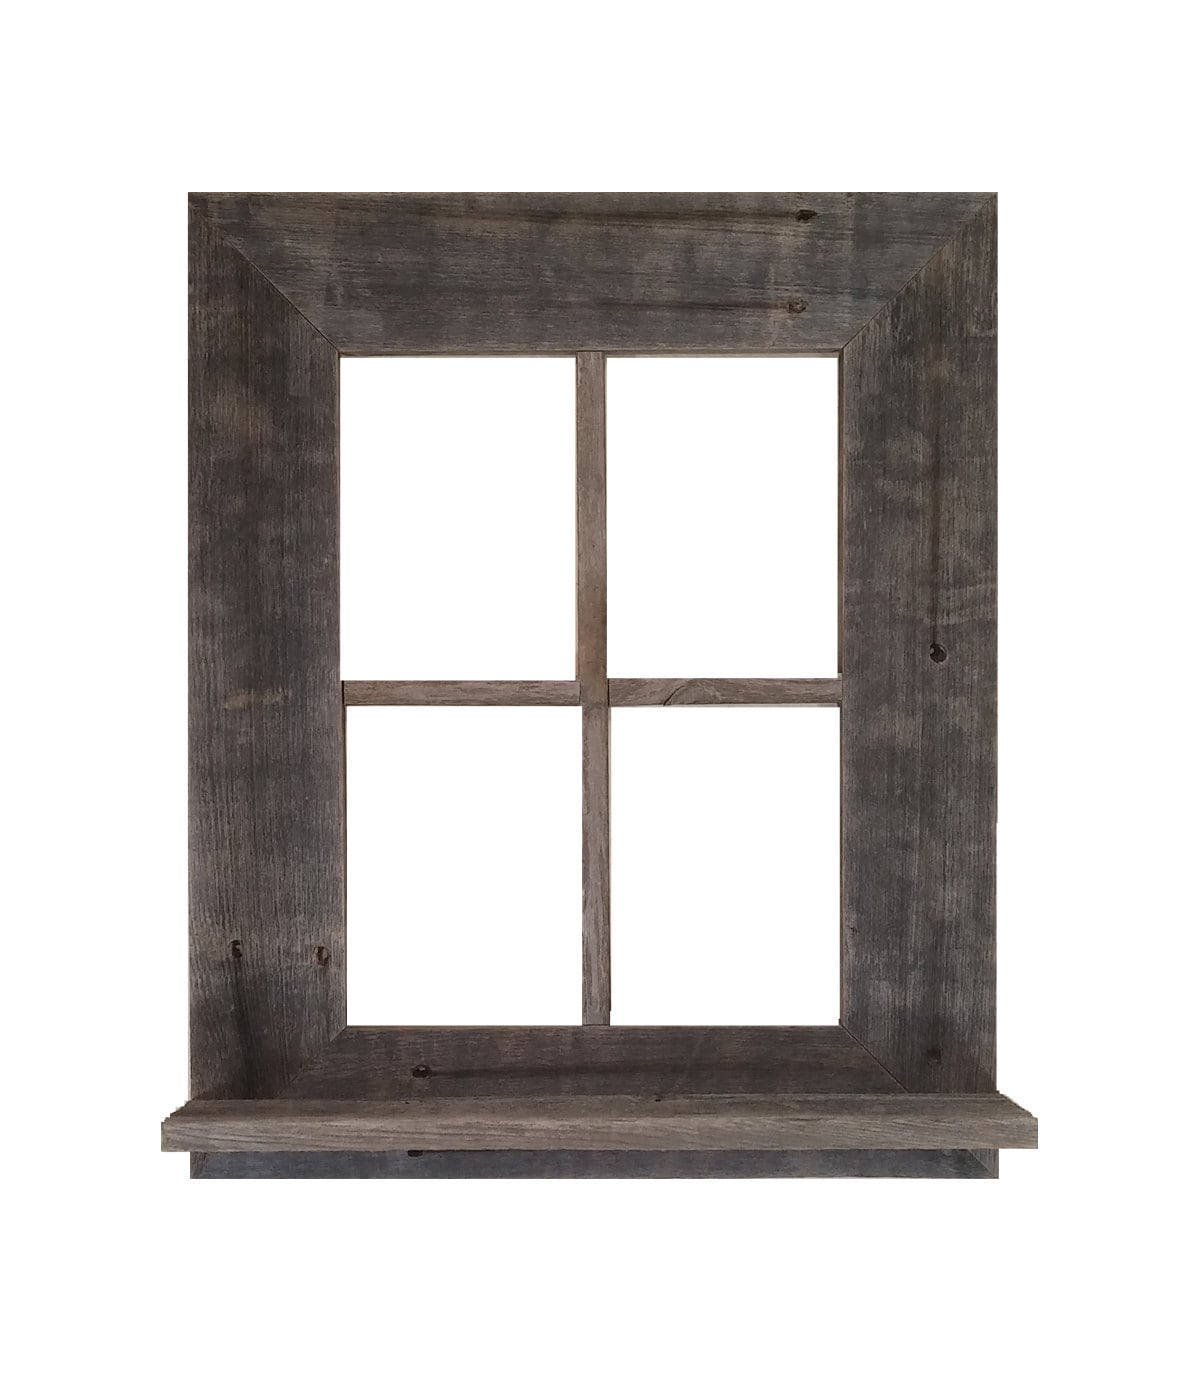 4x6 Picture Frames – Reclaimed Barn Wood Open Frame (No Glass or Back) -  Rustic Decor